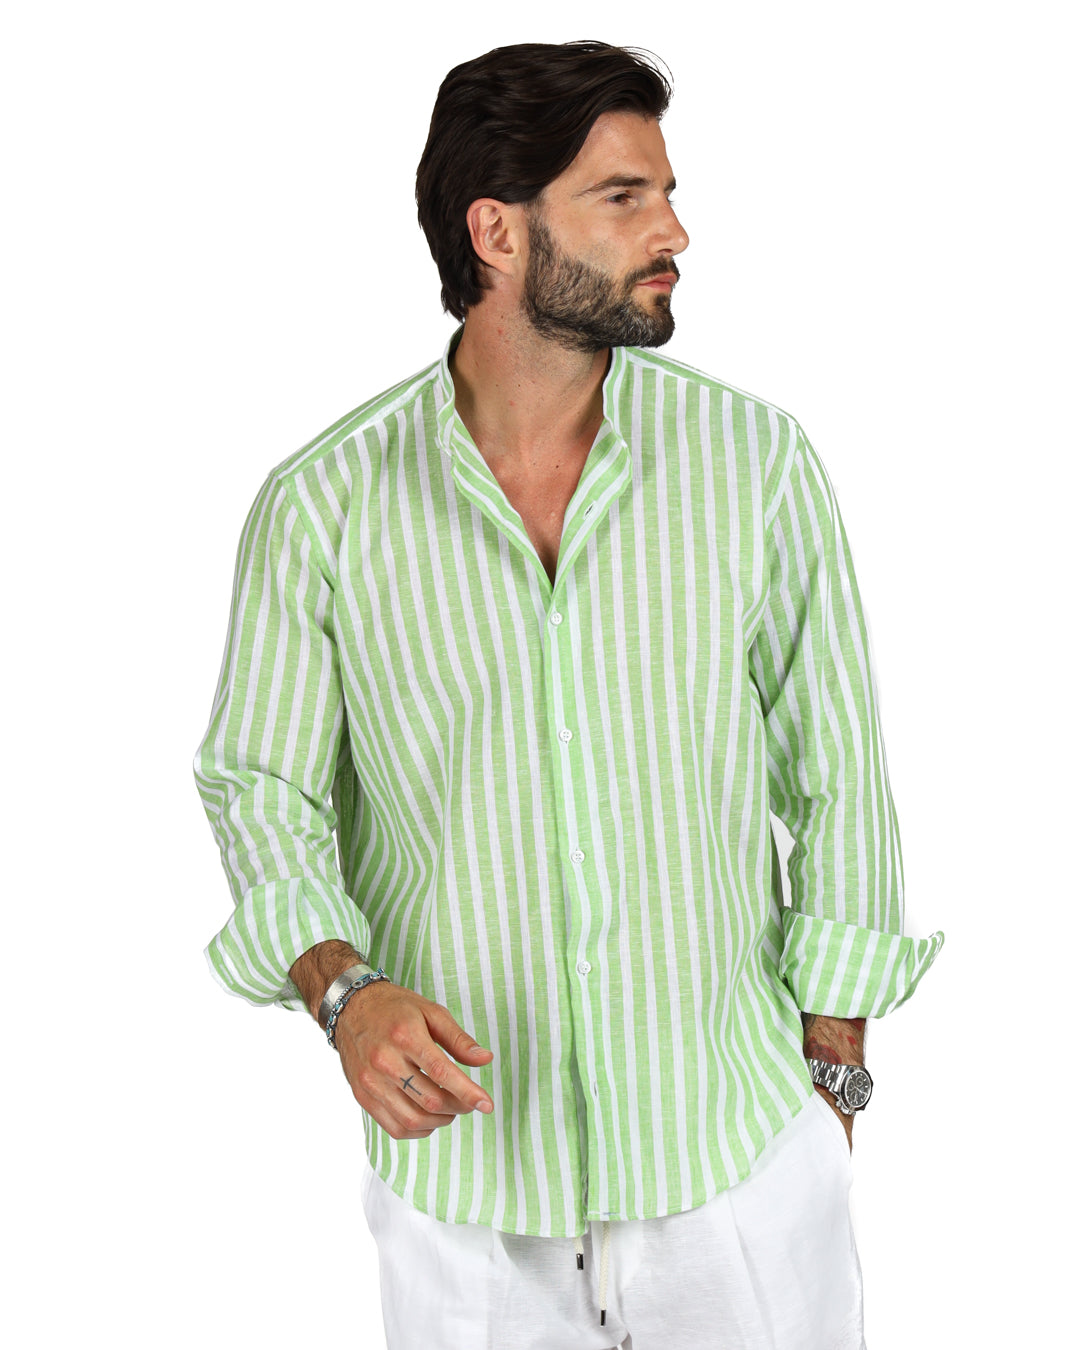 Procida - Korean shirt with wide green stripes in linen